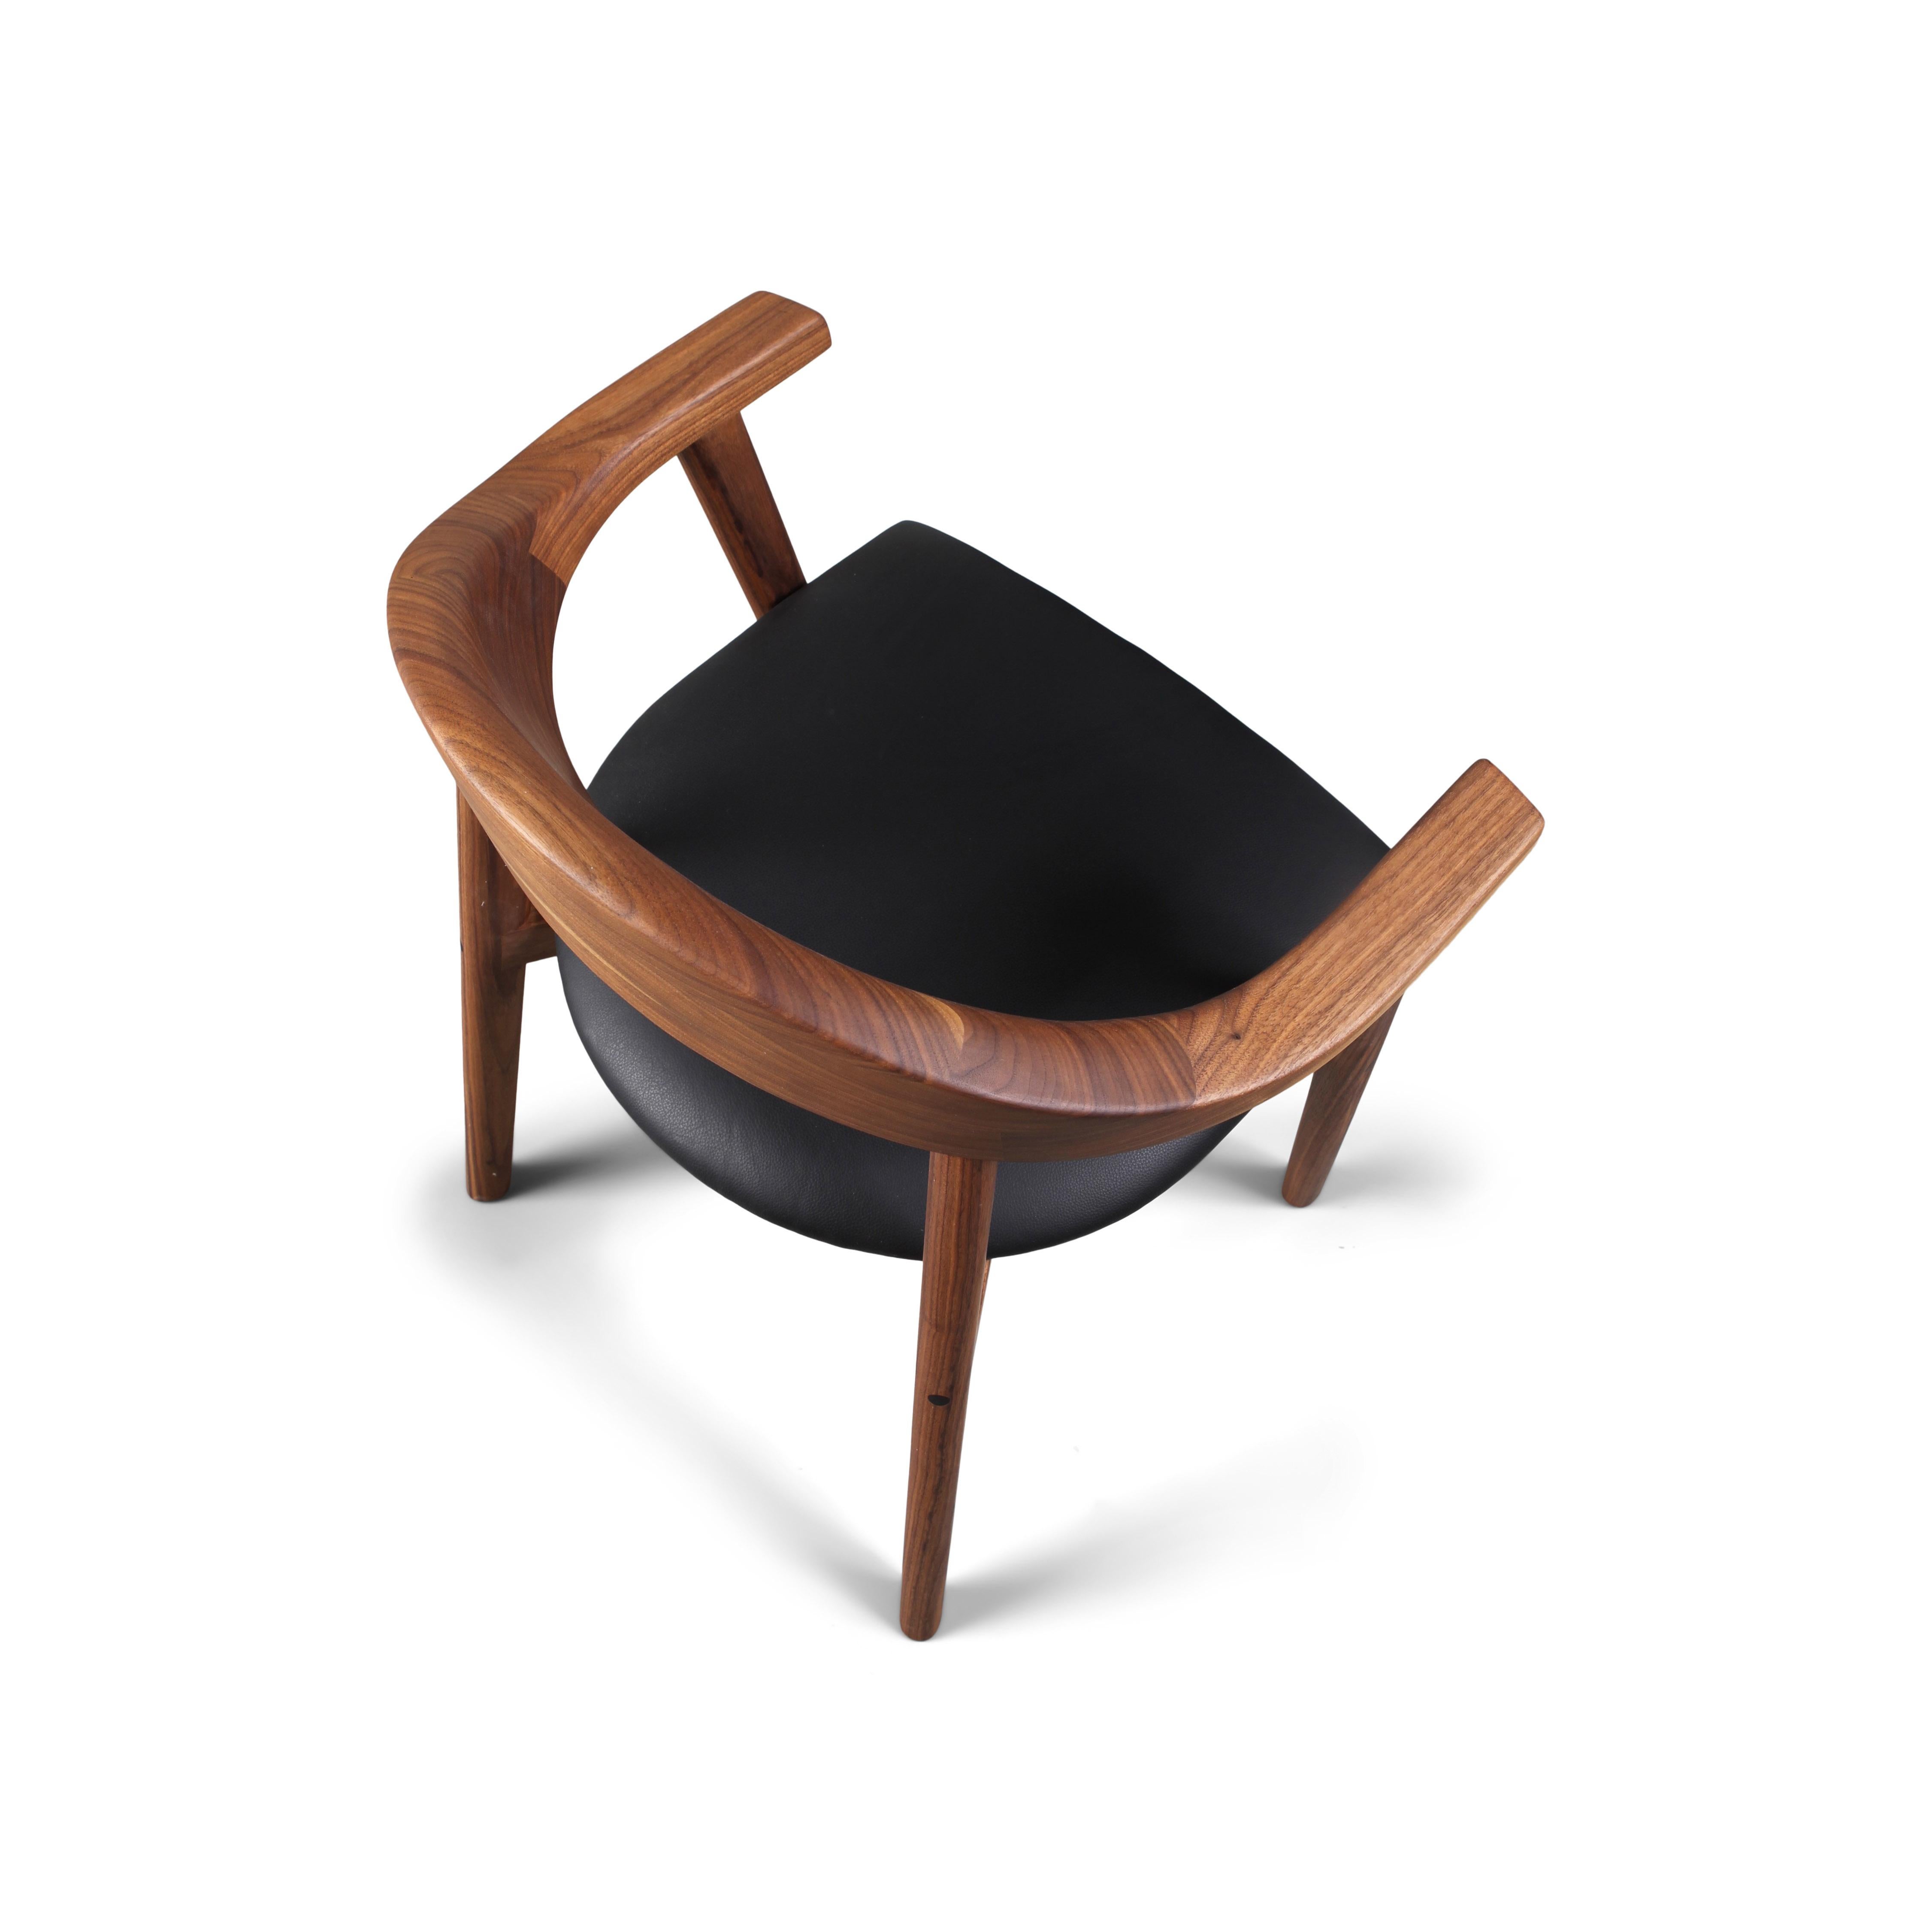 The solid wood Karve chair features soft curves and a contoured backrest exuding comfort and craftsmanship. Premium grade black walnut is hand-selected for character and color uniformity, beautiful from every angle.

The Karve upholstered chair is